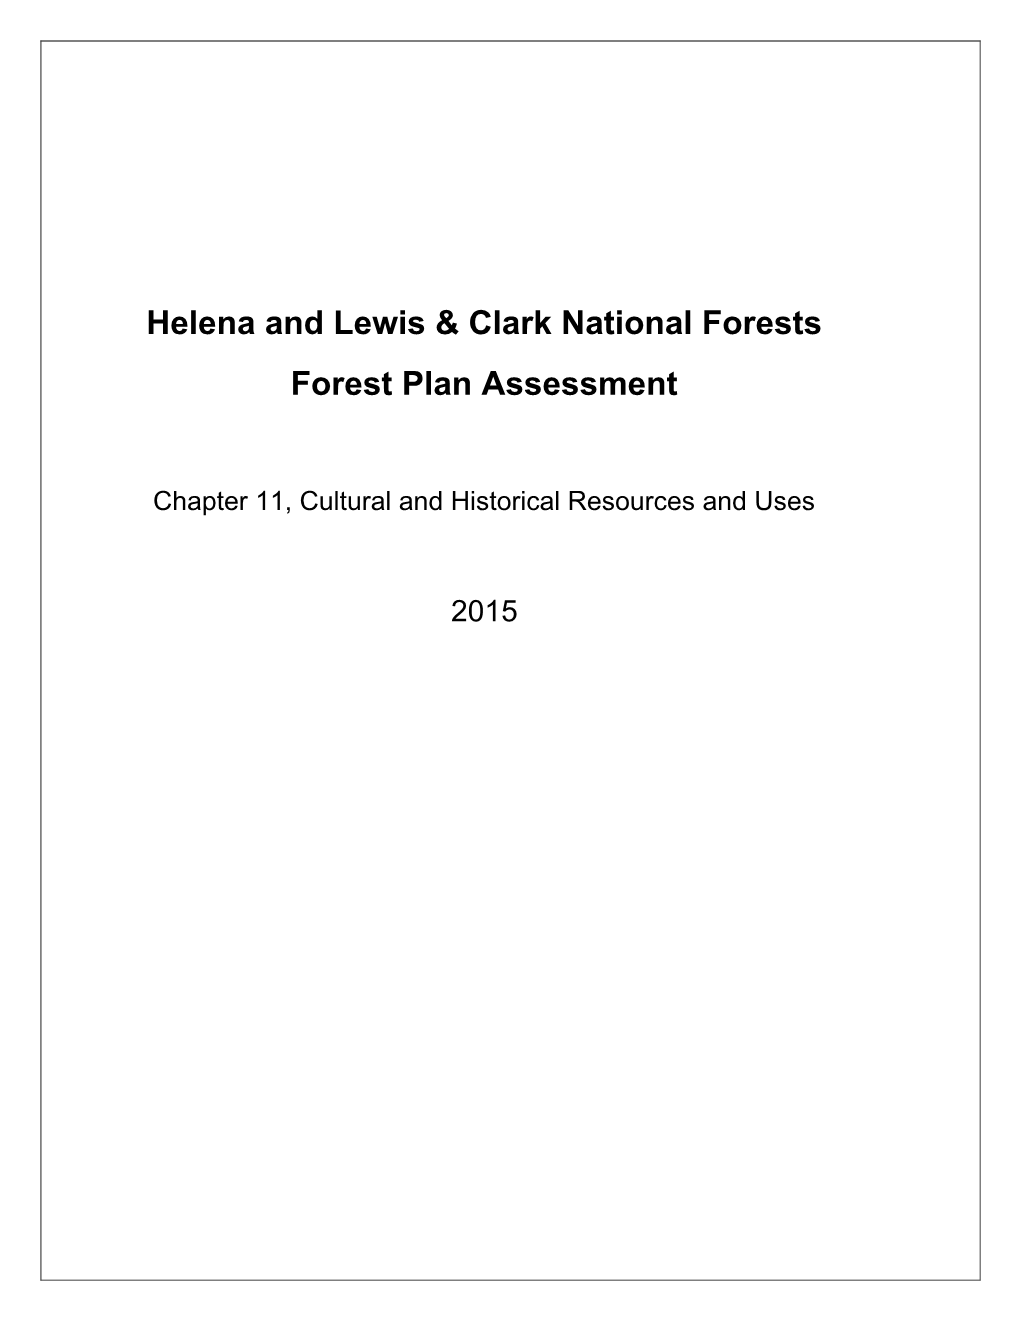 Helena and Lewis & Clark National Forests Forest Plan Assessment